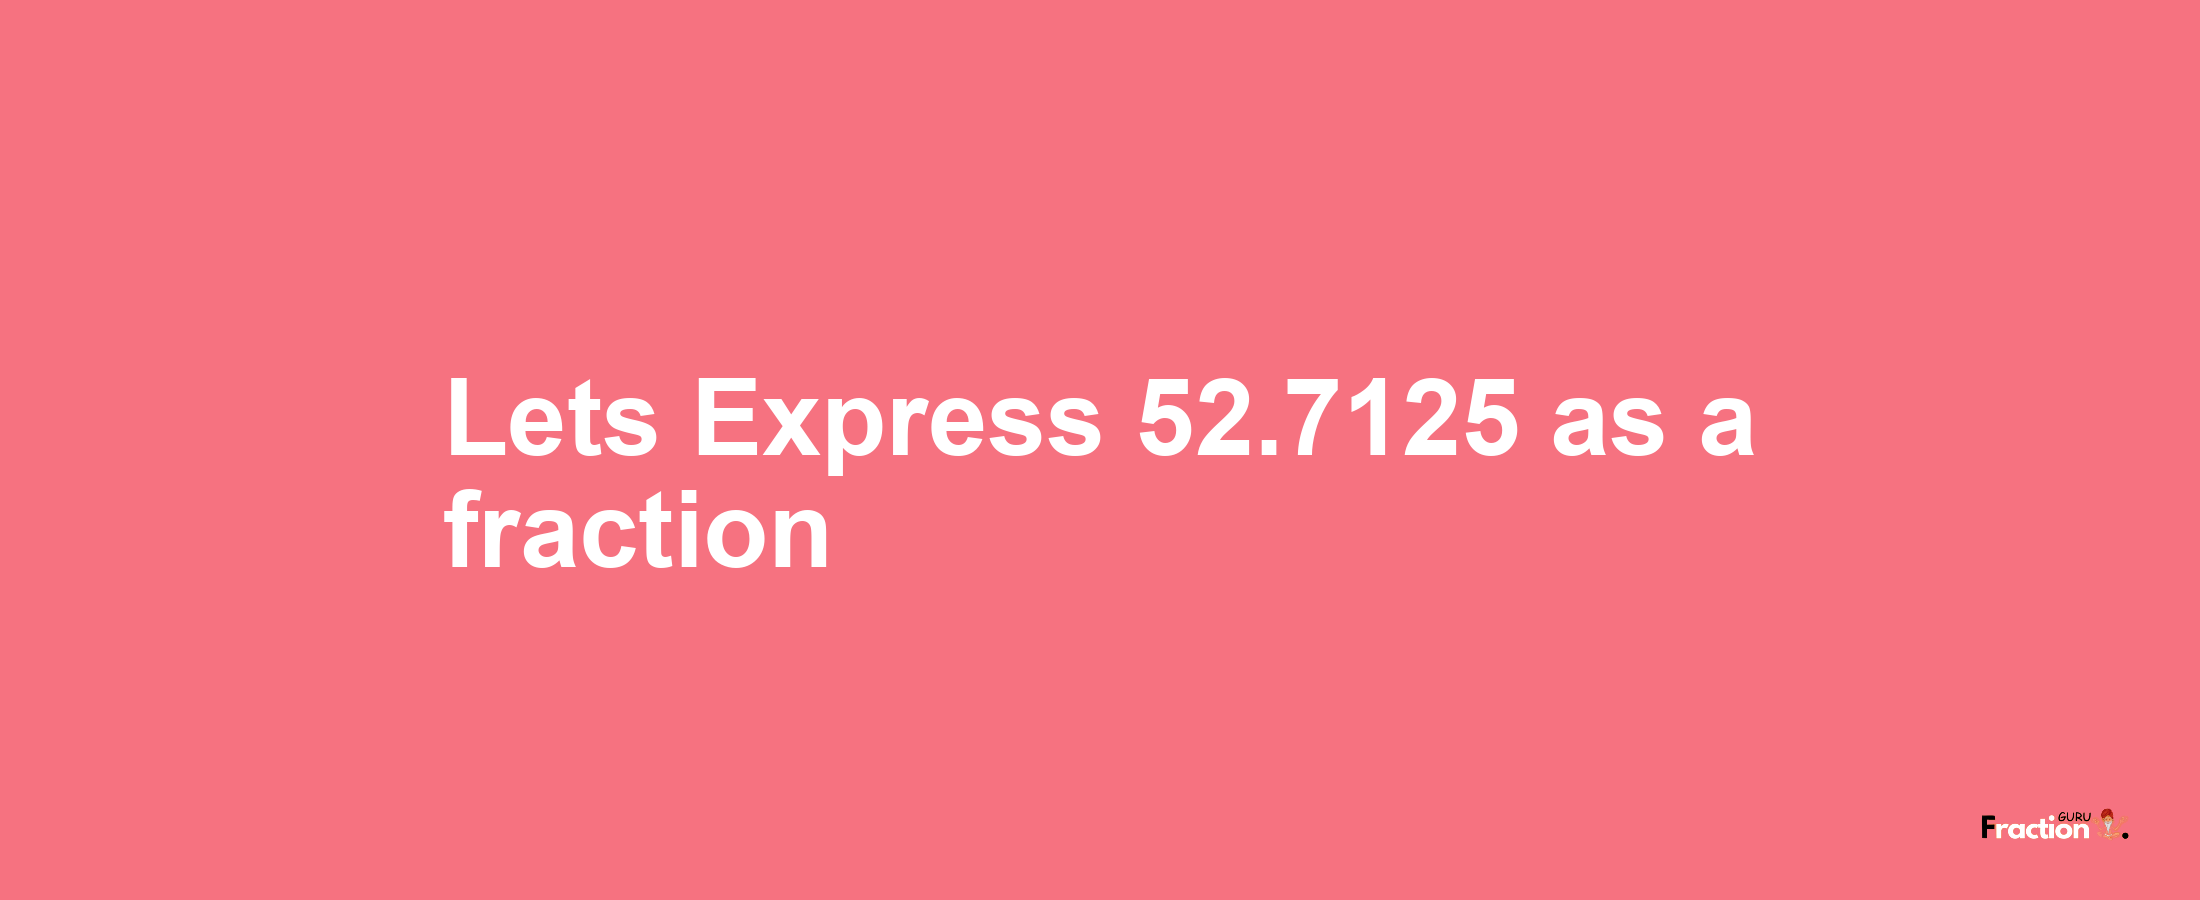 Lets Express 52.7125 as afraction